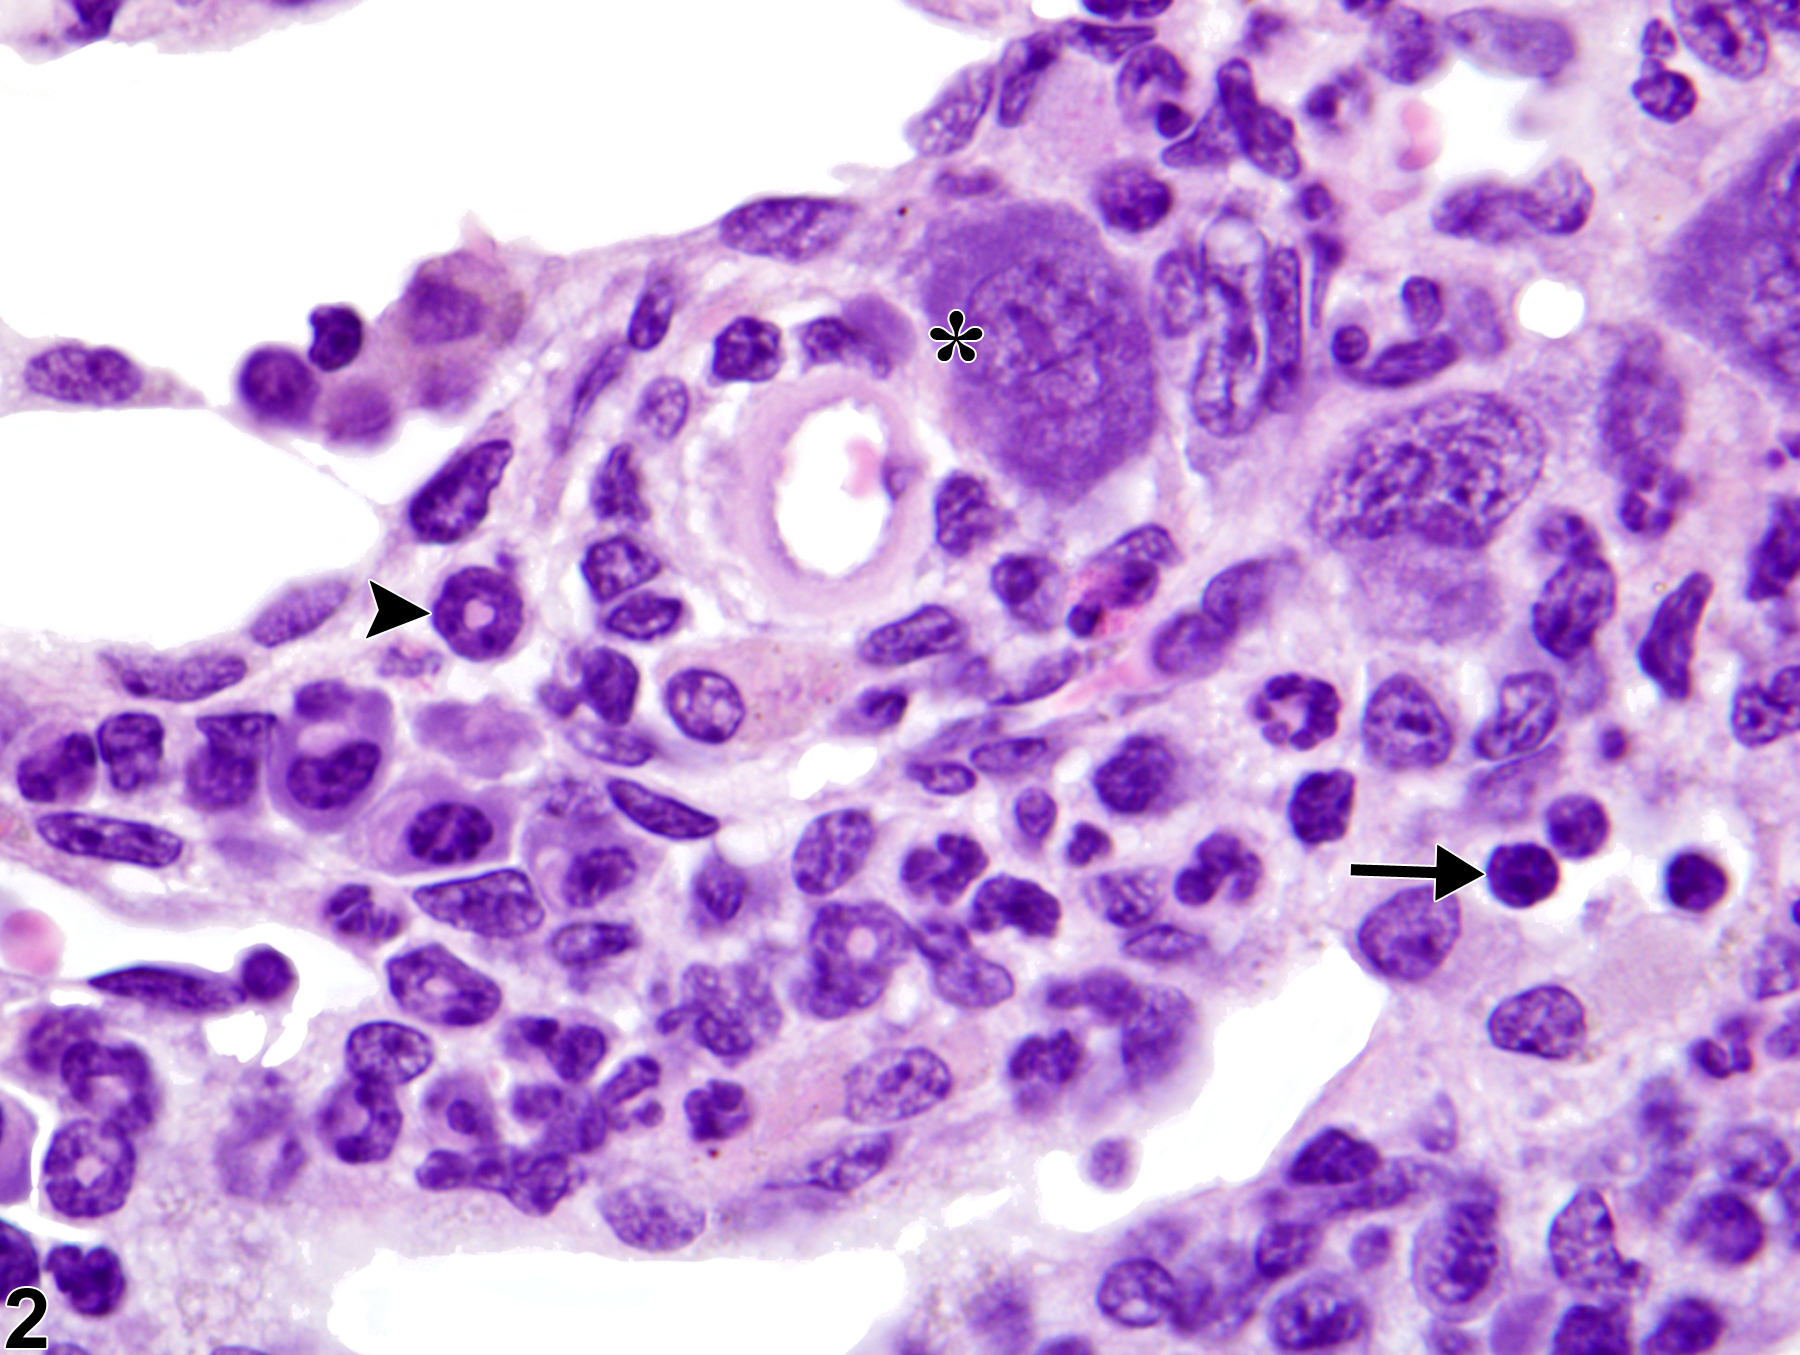 Image of extramedullary hematopoiesis in the lymph node from a female B6C3F1/N mouse in a chronic study